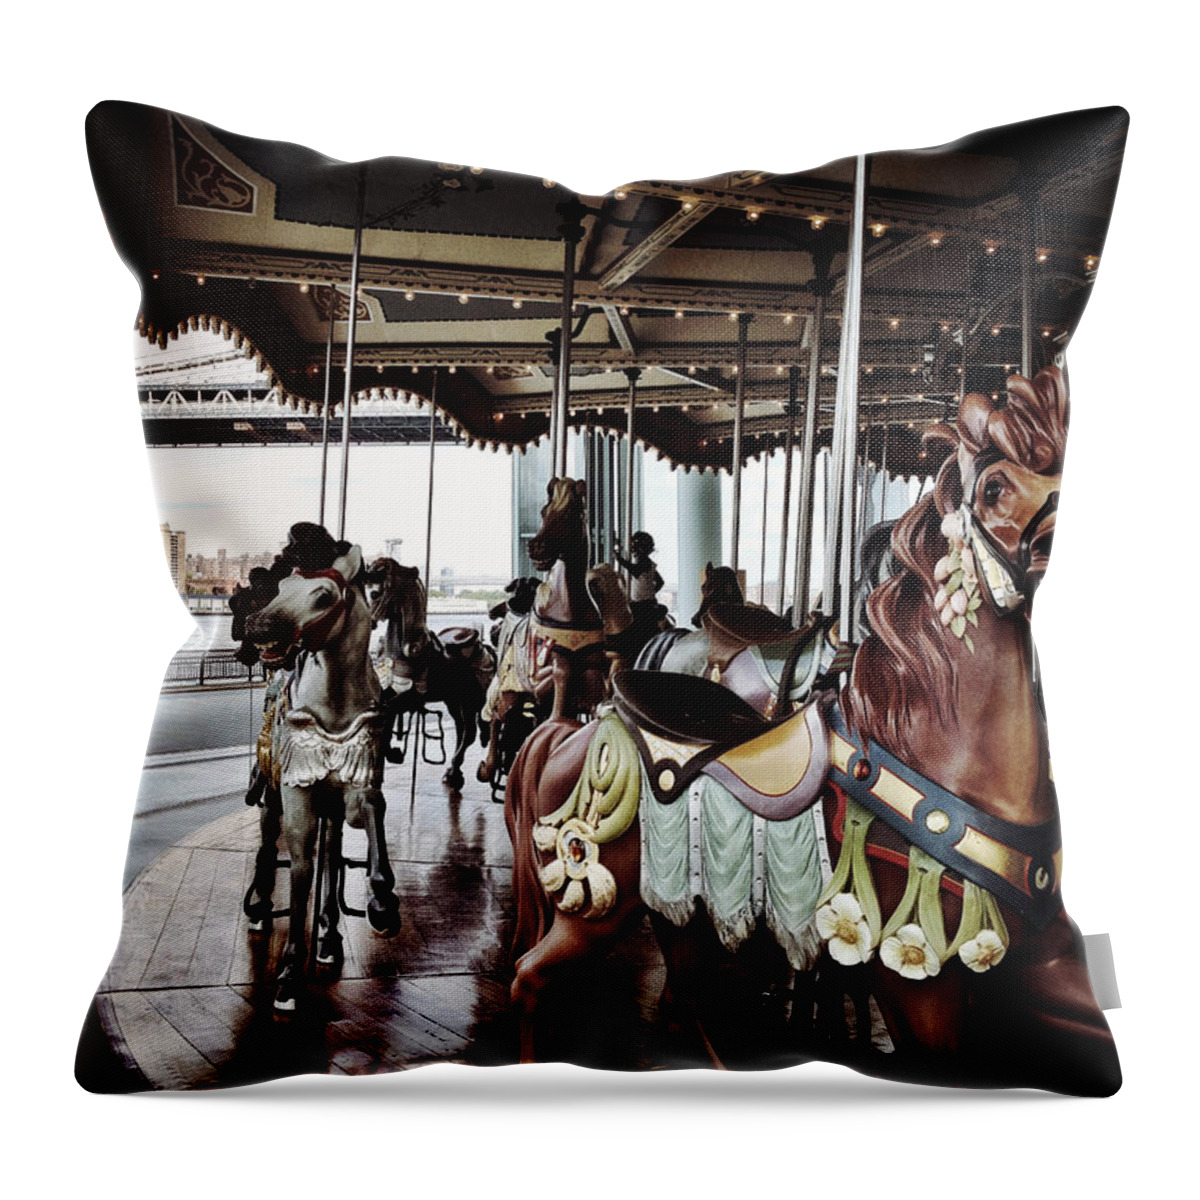 New York Throw Pillow featuring the photograph Jane's Carousel #6 by Natasha Marco